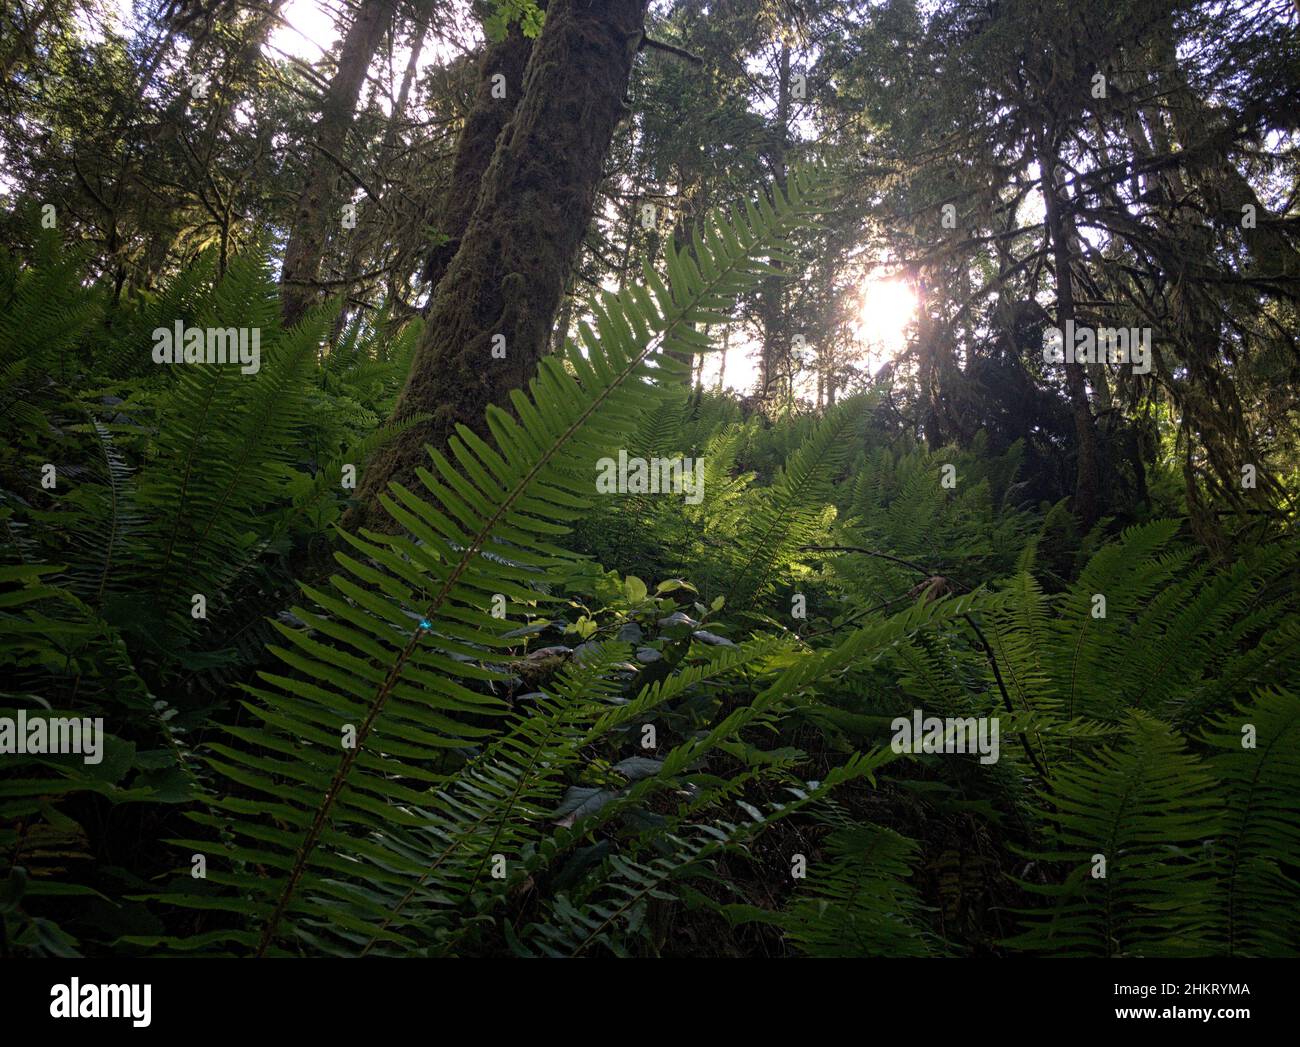 Sunlight filters down through the branches of trees to illuminate ferns on the forest floor in a Valley on Vancouver Island, Canada. Stock Photo